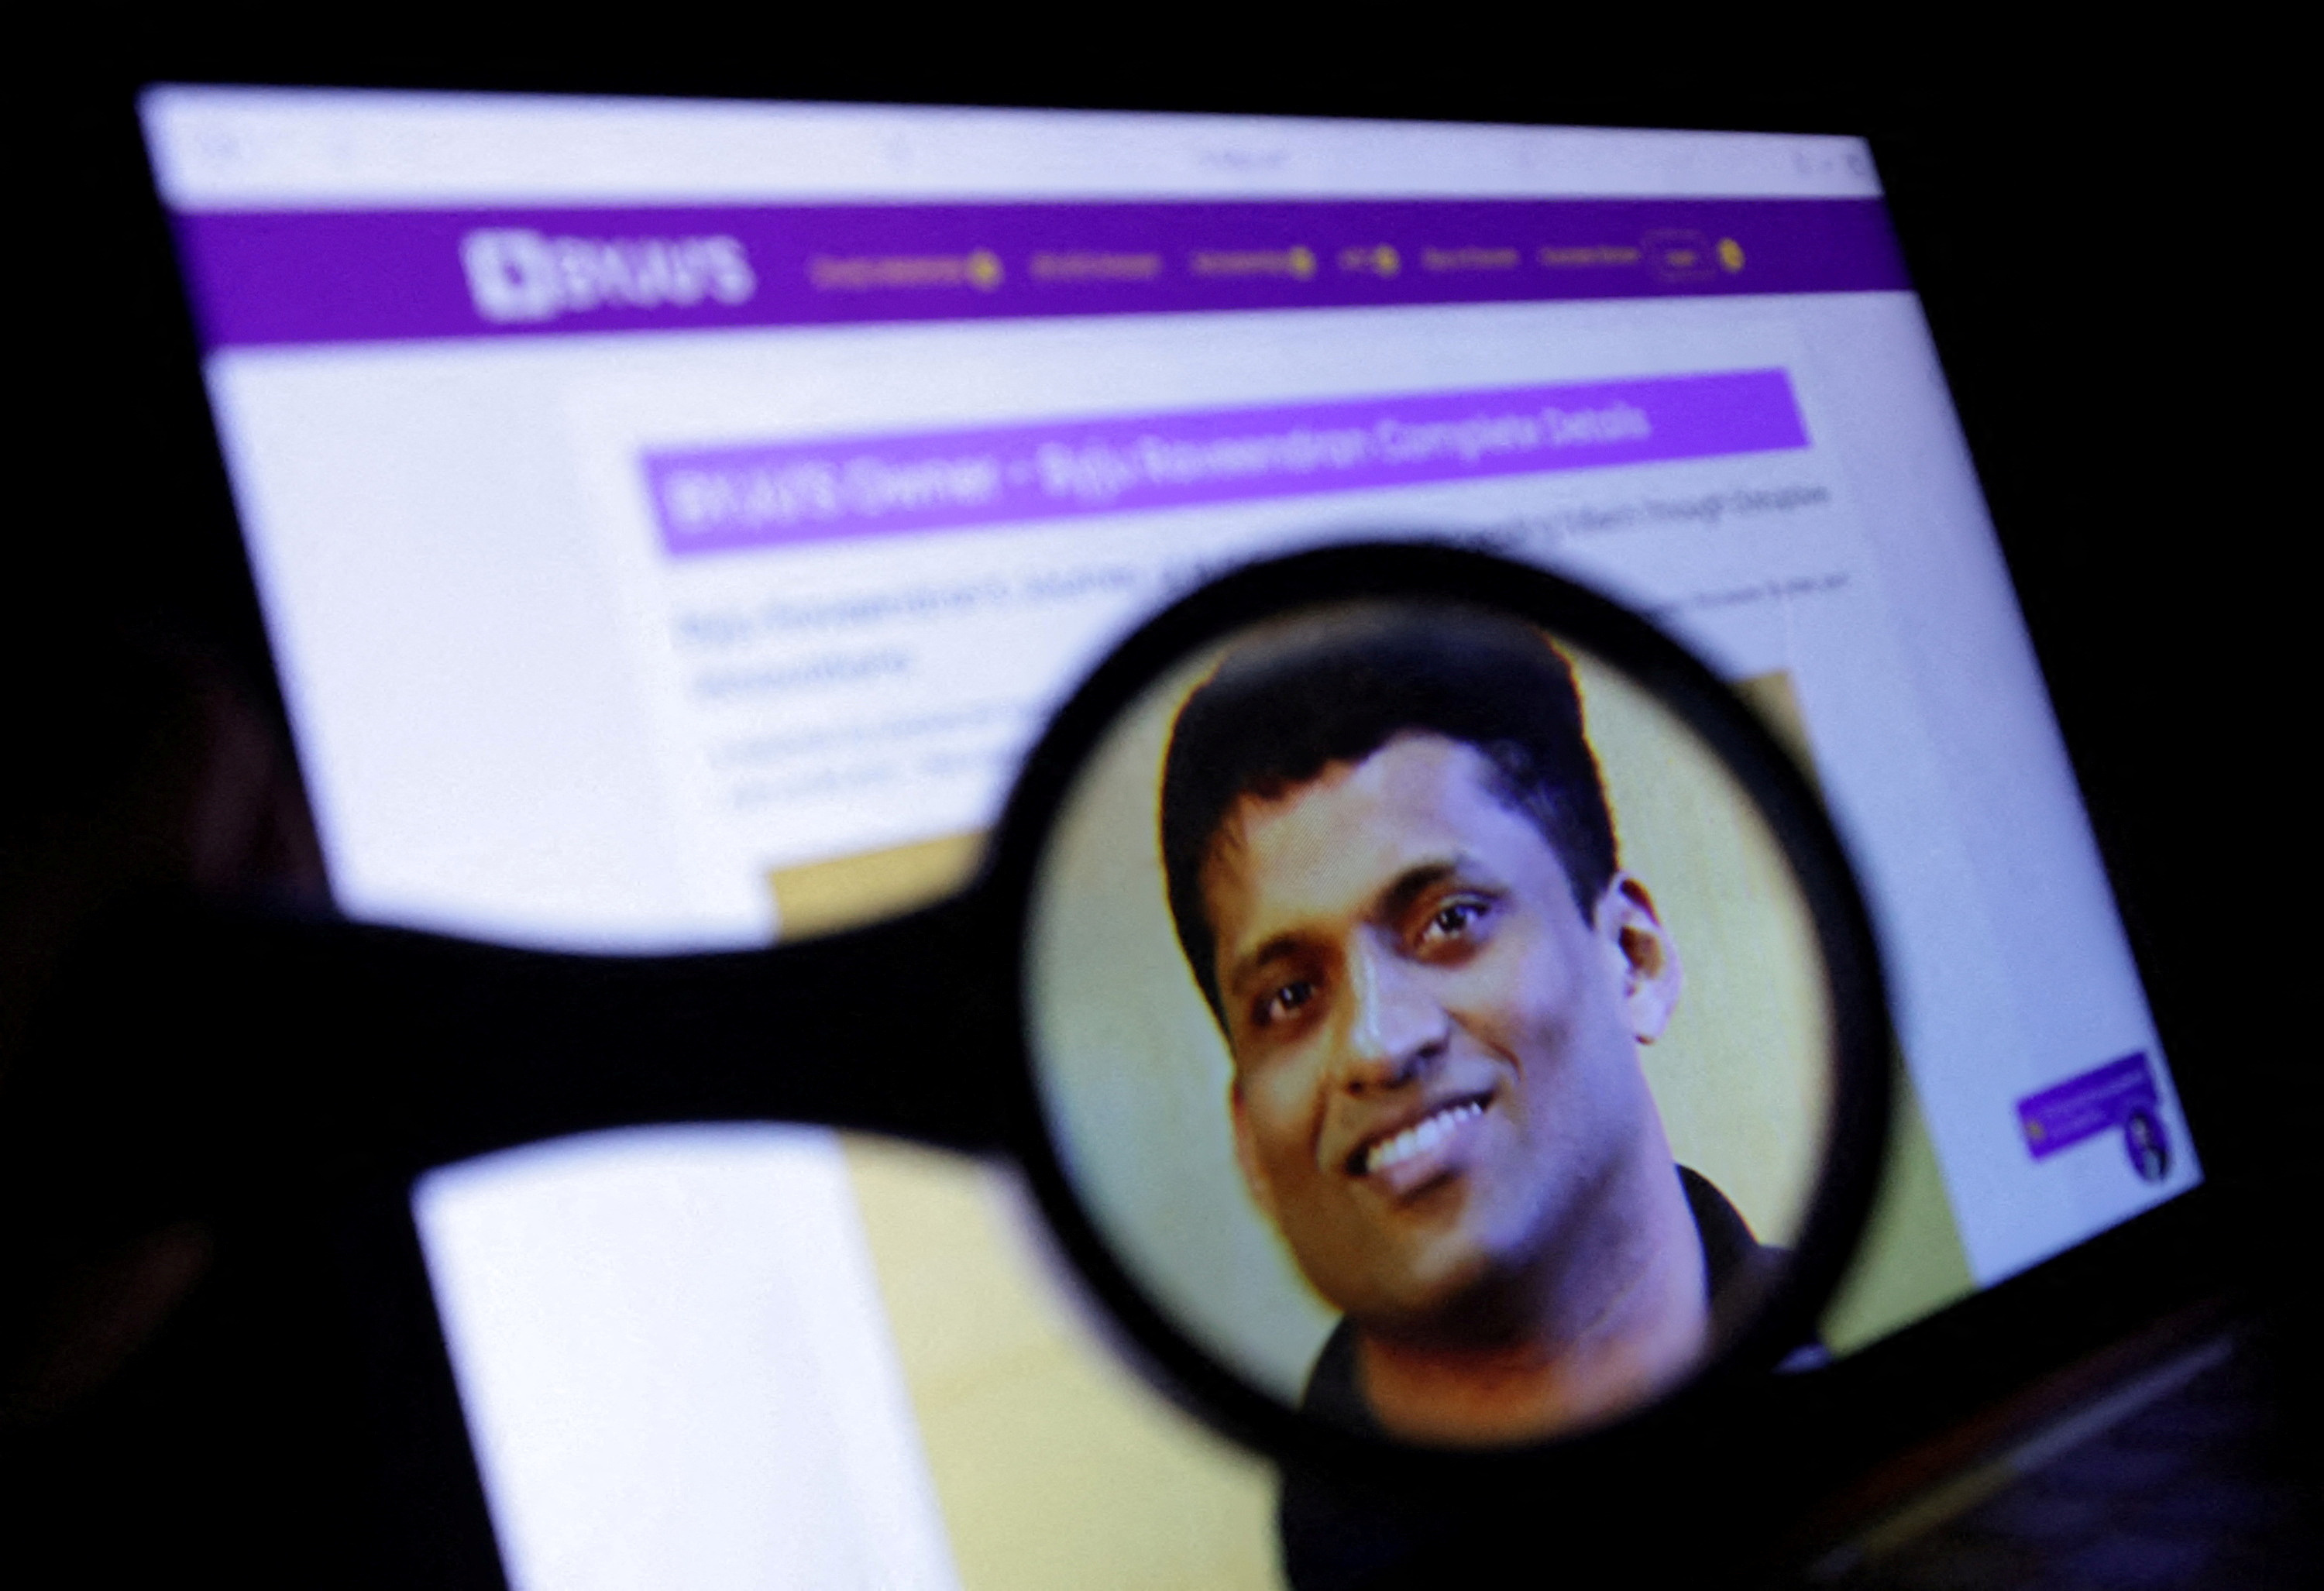 Illustration shows BYJU'S Owner Byju Raveendran photo on his company web page